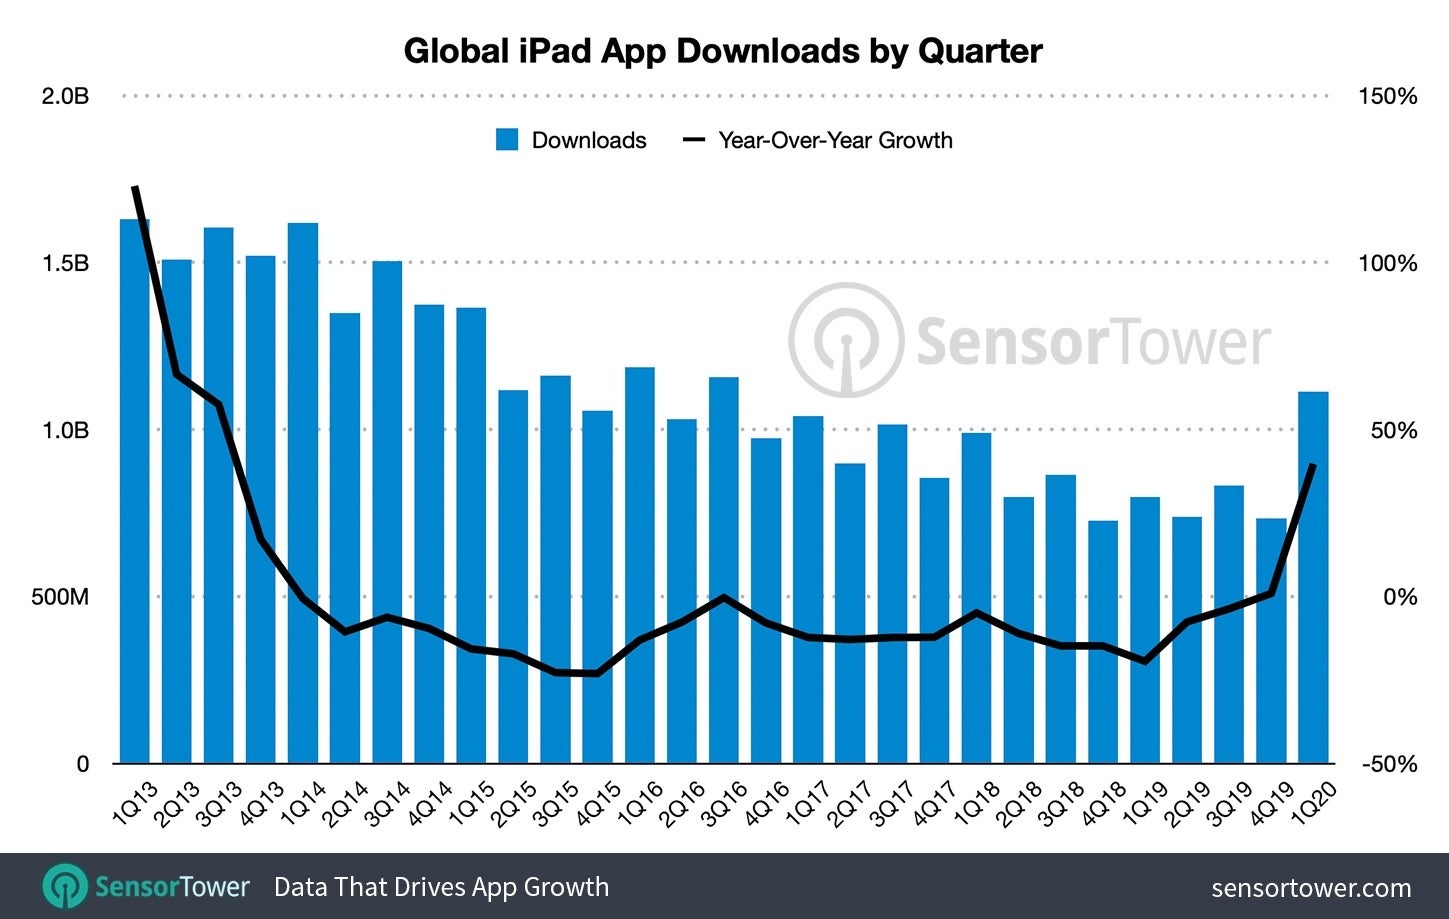 During the deadly COVID-19 pandemic, Apple iPad users are spending big bucks on apps for their tablets - App Store purchases for the Apple iPad hit a record $2.1 billion in the first quarter